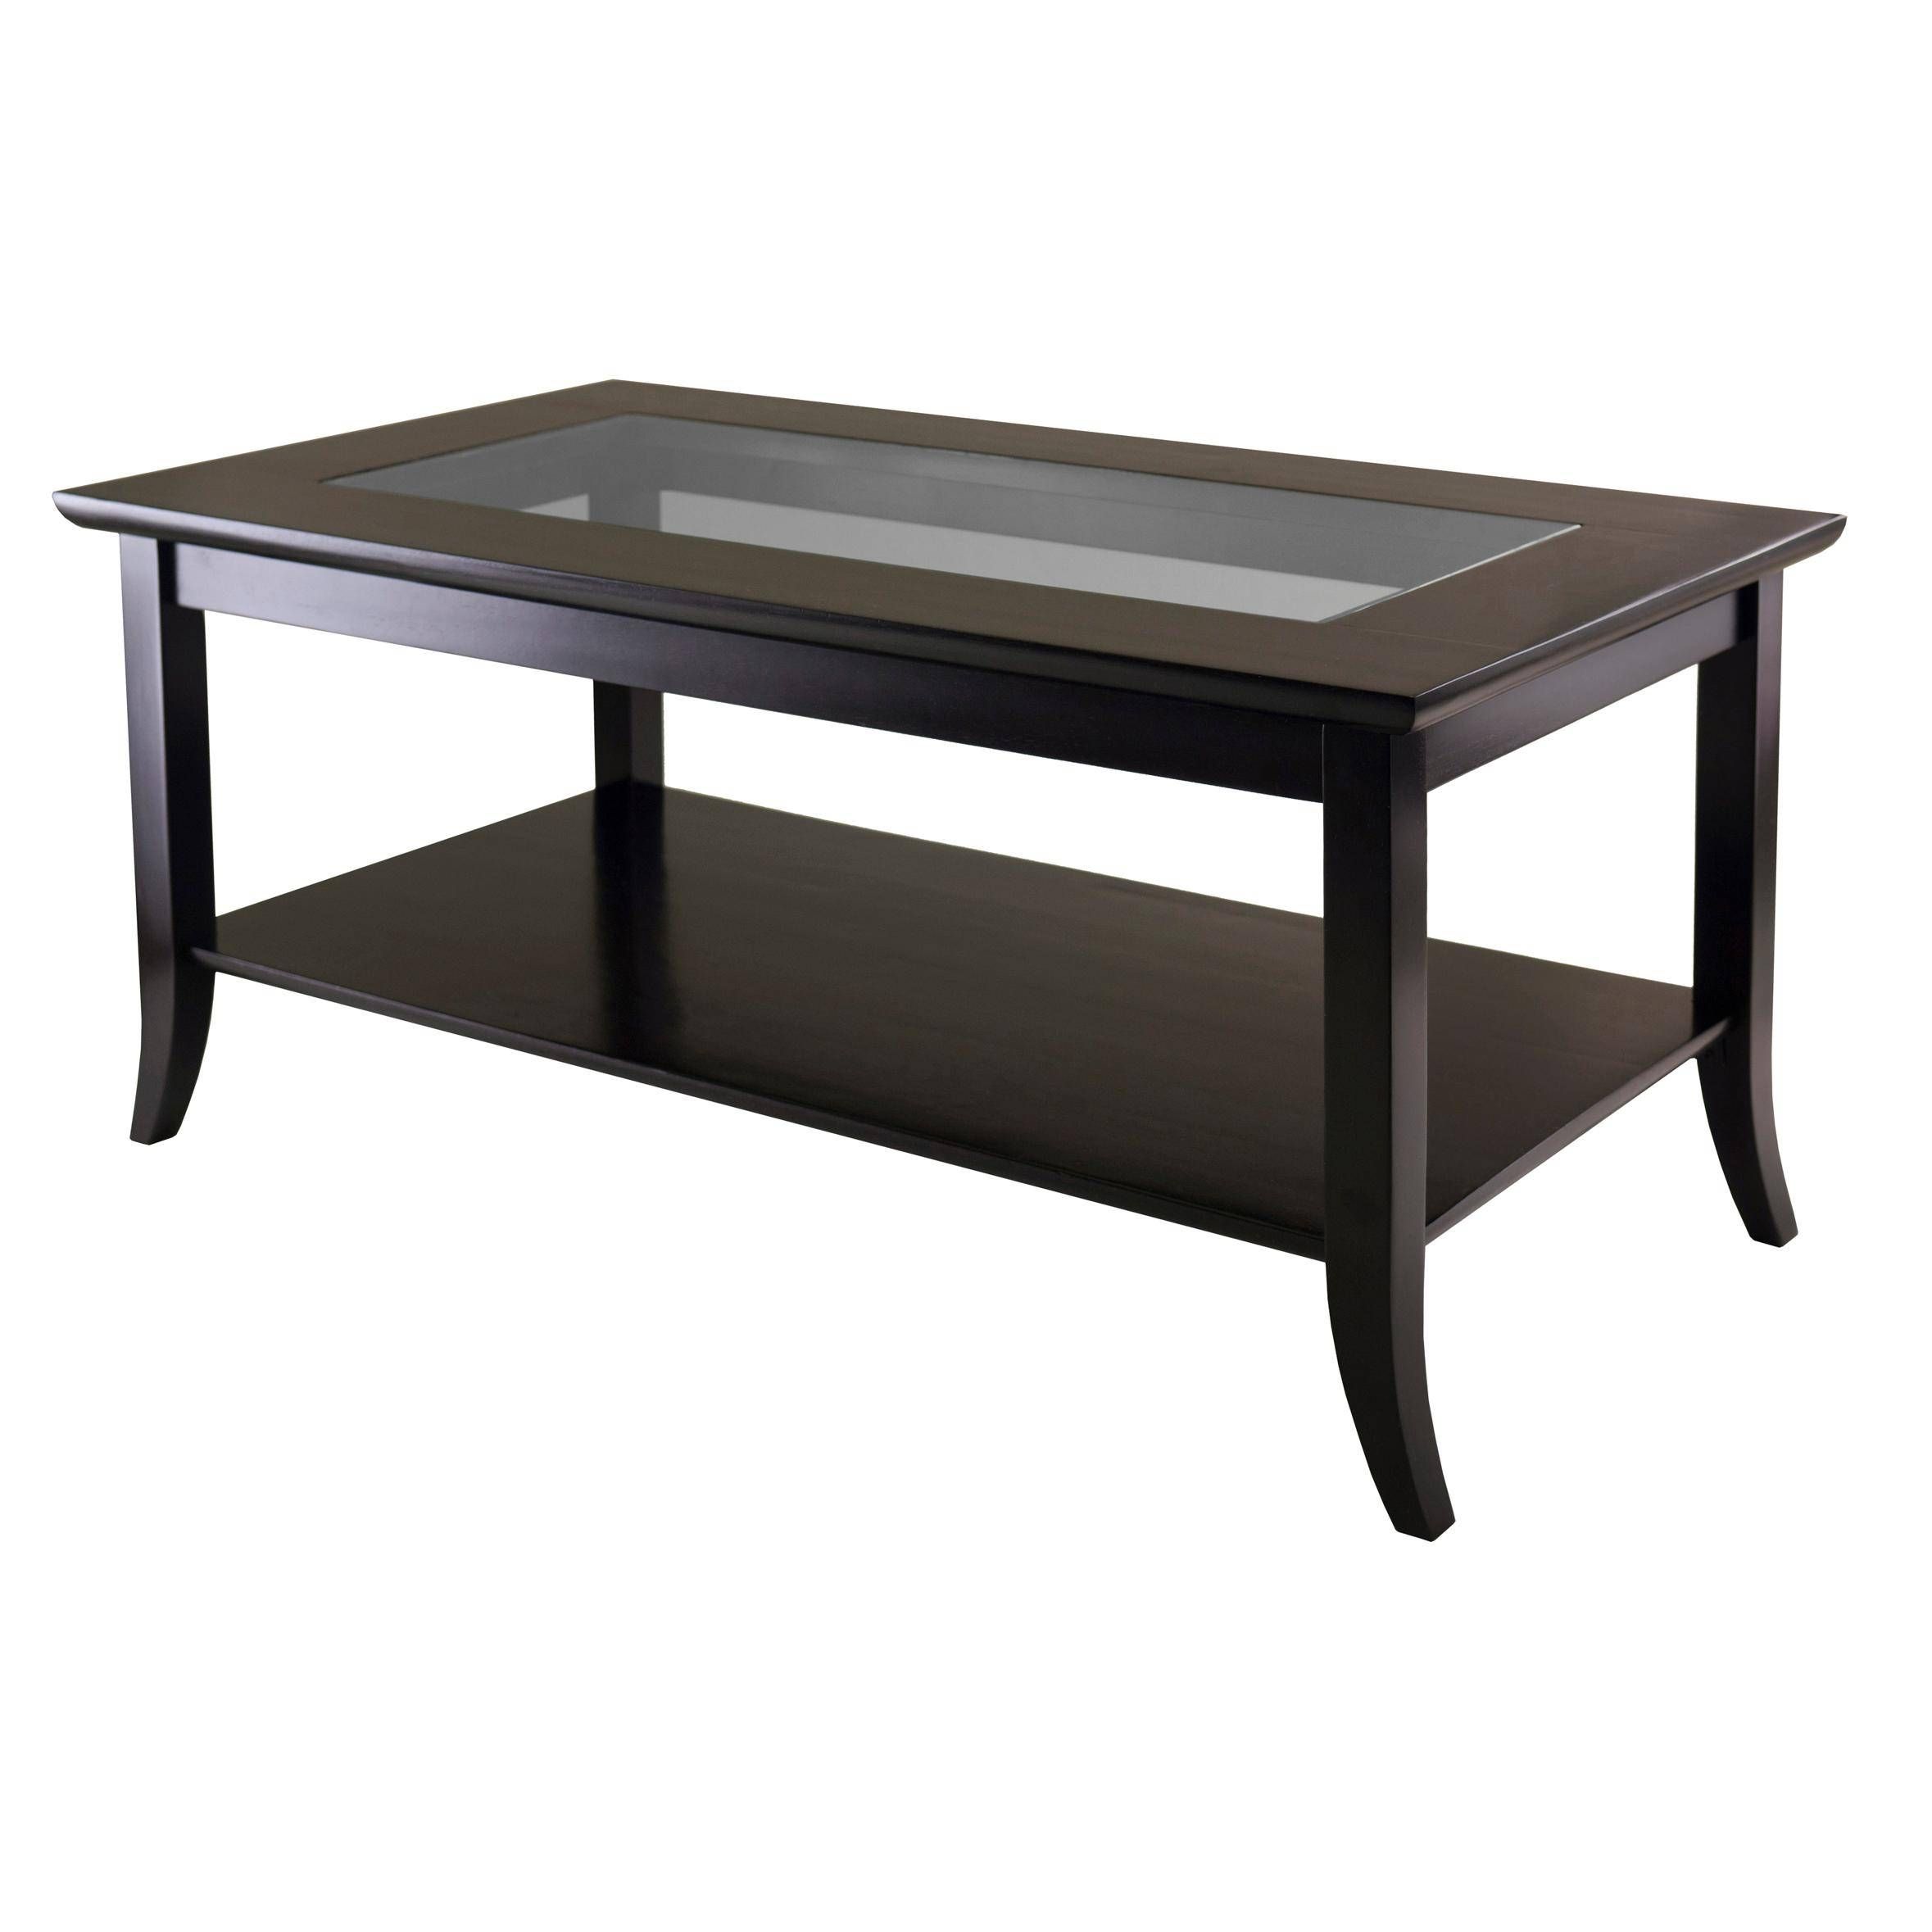 Coffee Table: Popular Black Glass Coffee Table Design Ideas Modern For Black Wood And Glass Coffee Tables (View 20 of 30)